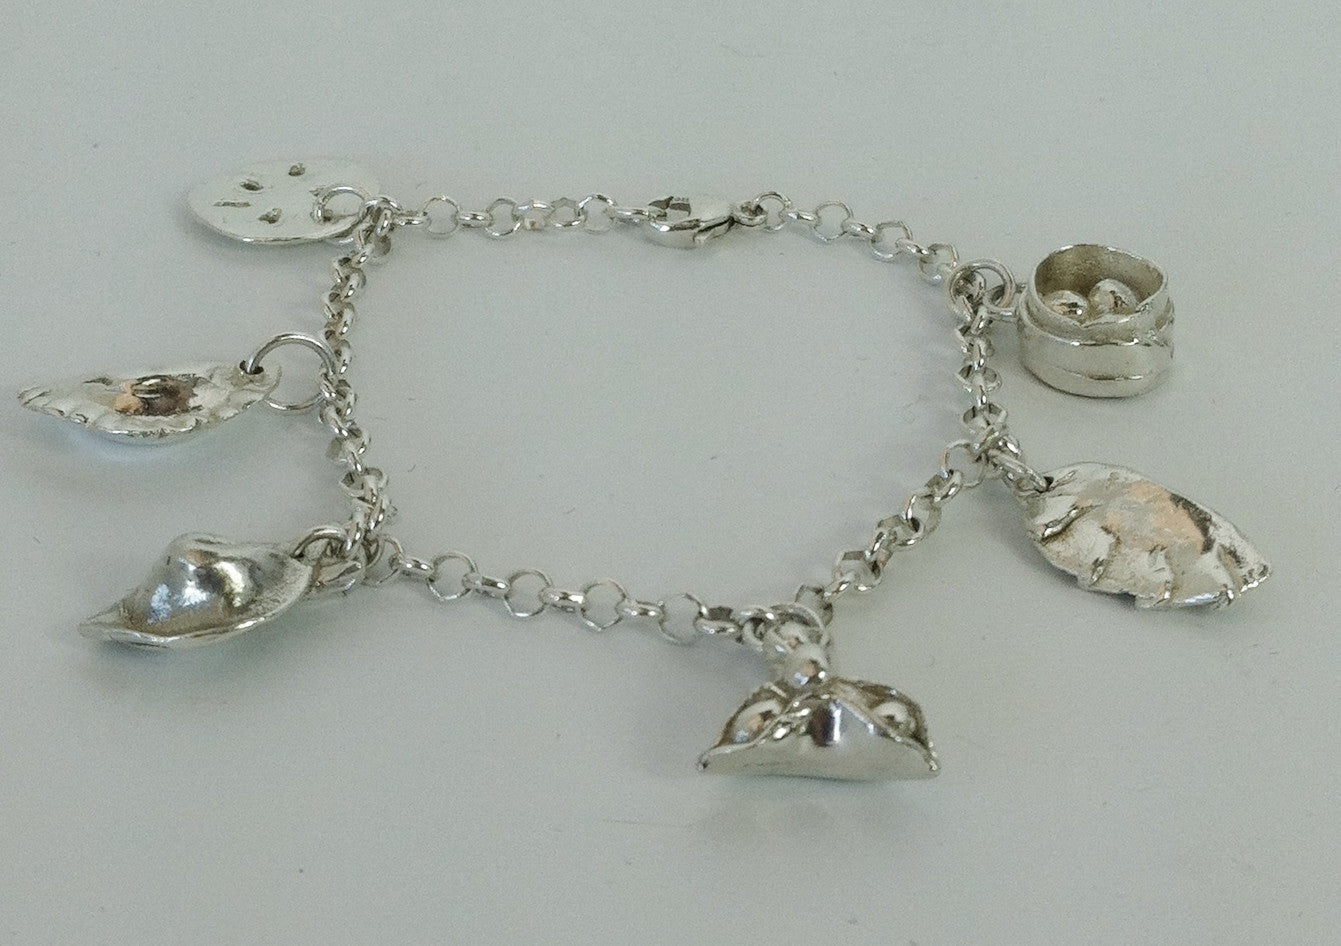 Chinese Dim Sum Bracelet in Sterling Silver